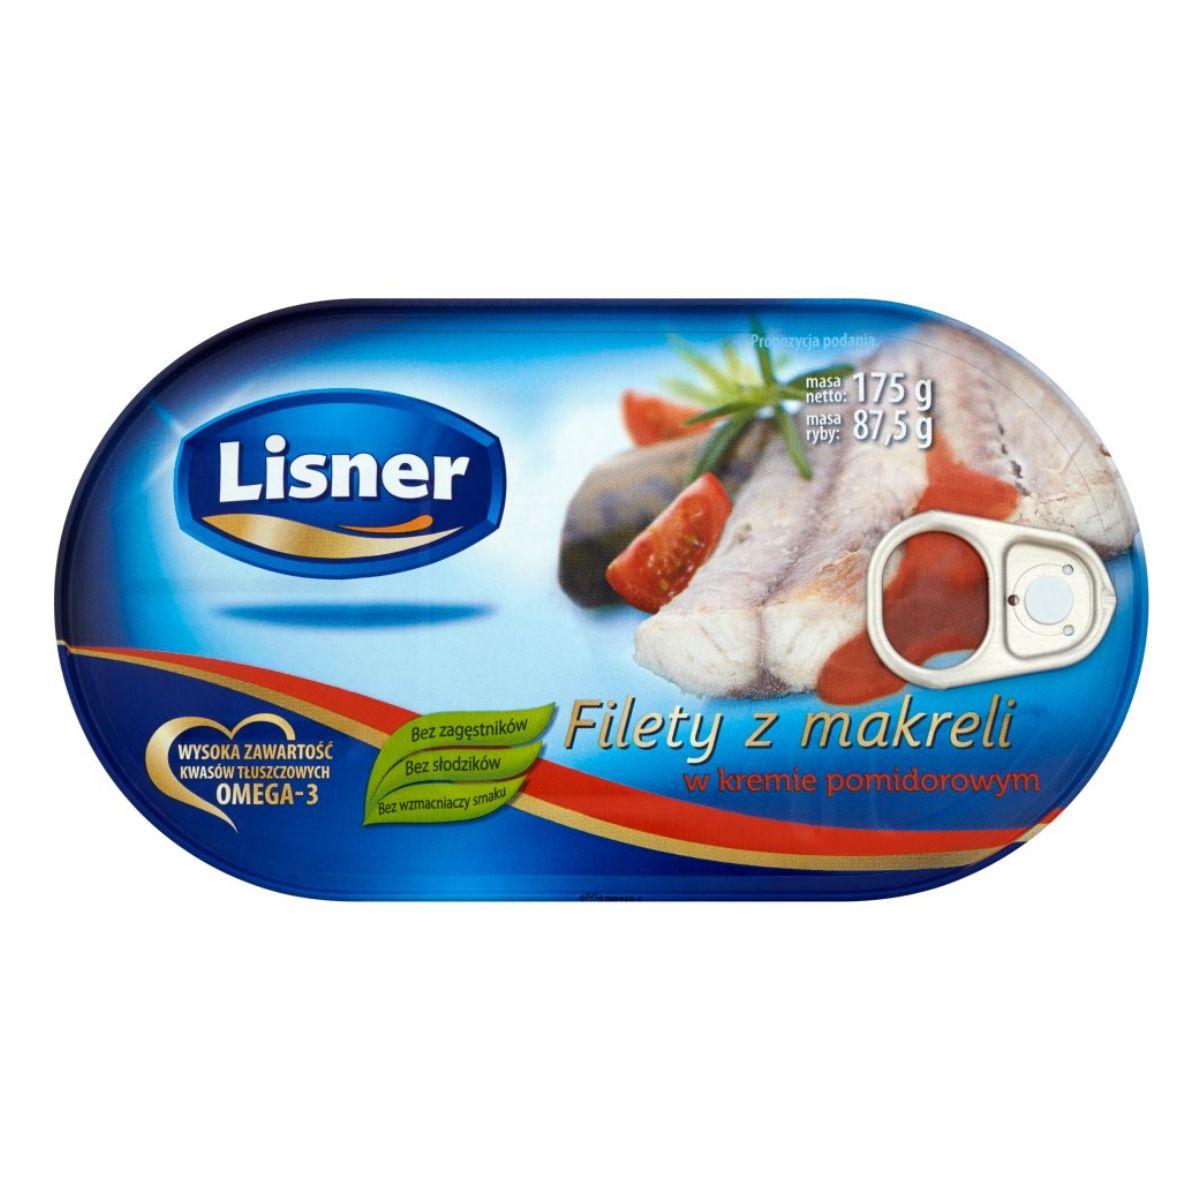 A tin of Lisner - Mackerel Fillets in Tomato Cream - 175g on a white background.